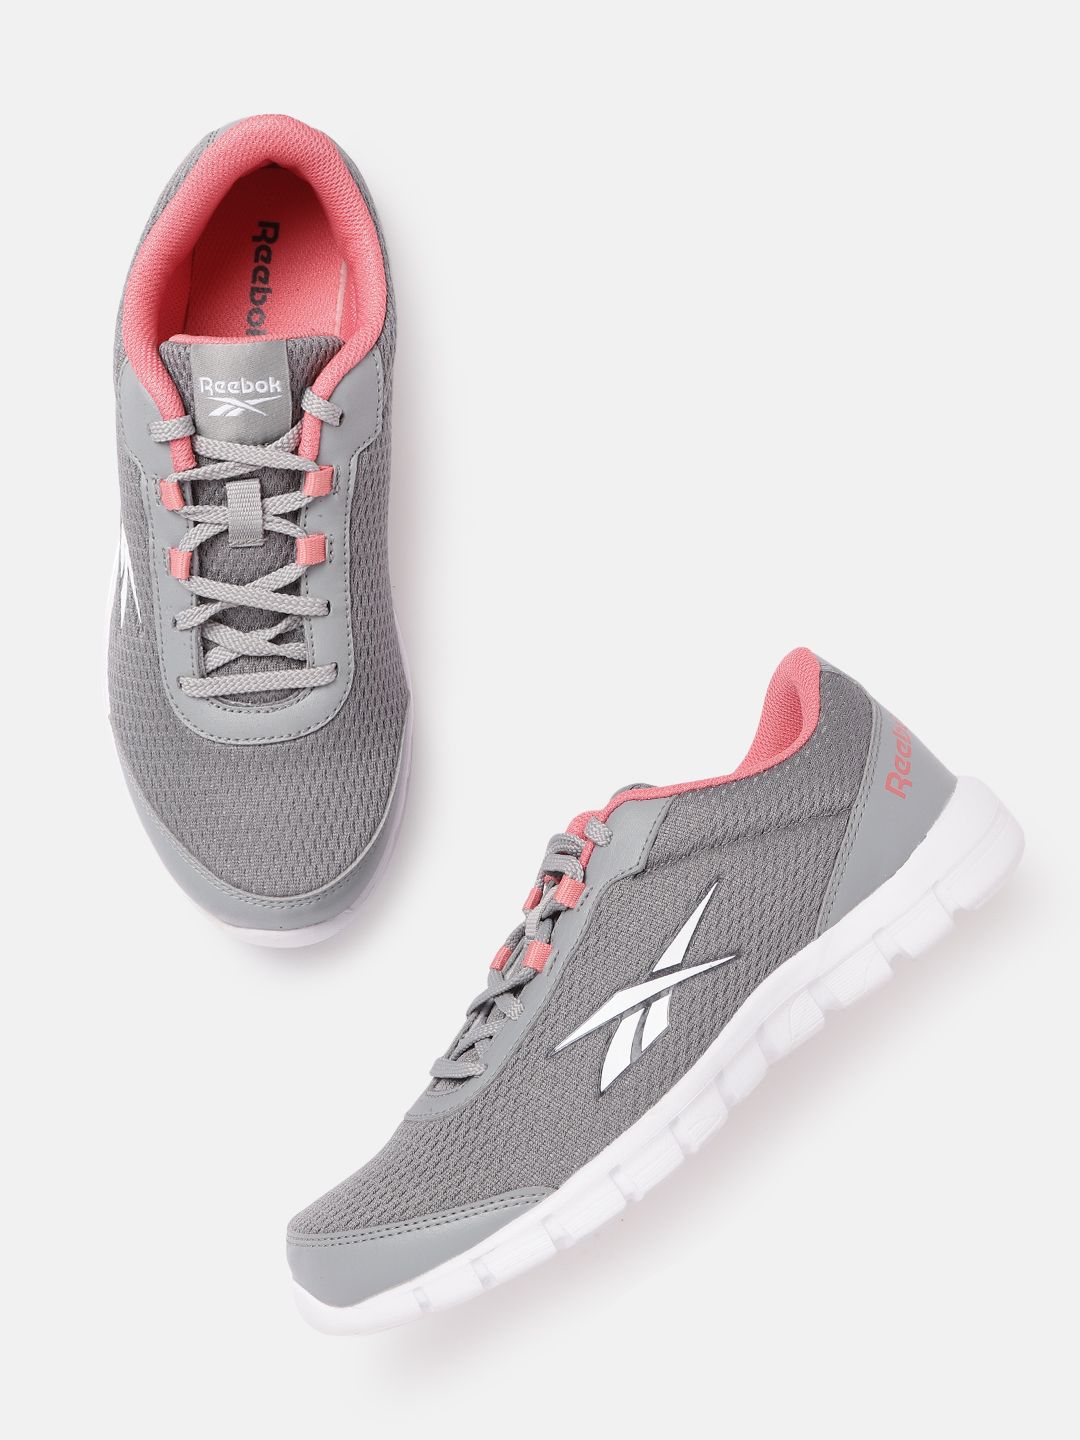 Reebok Women Grey Woven Design Lux Running Shoes Price in India